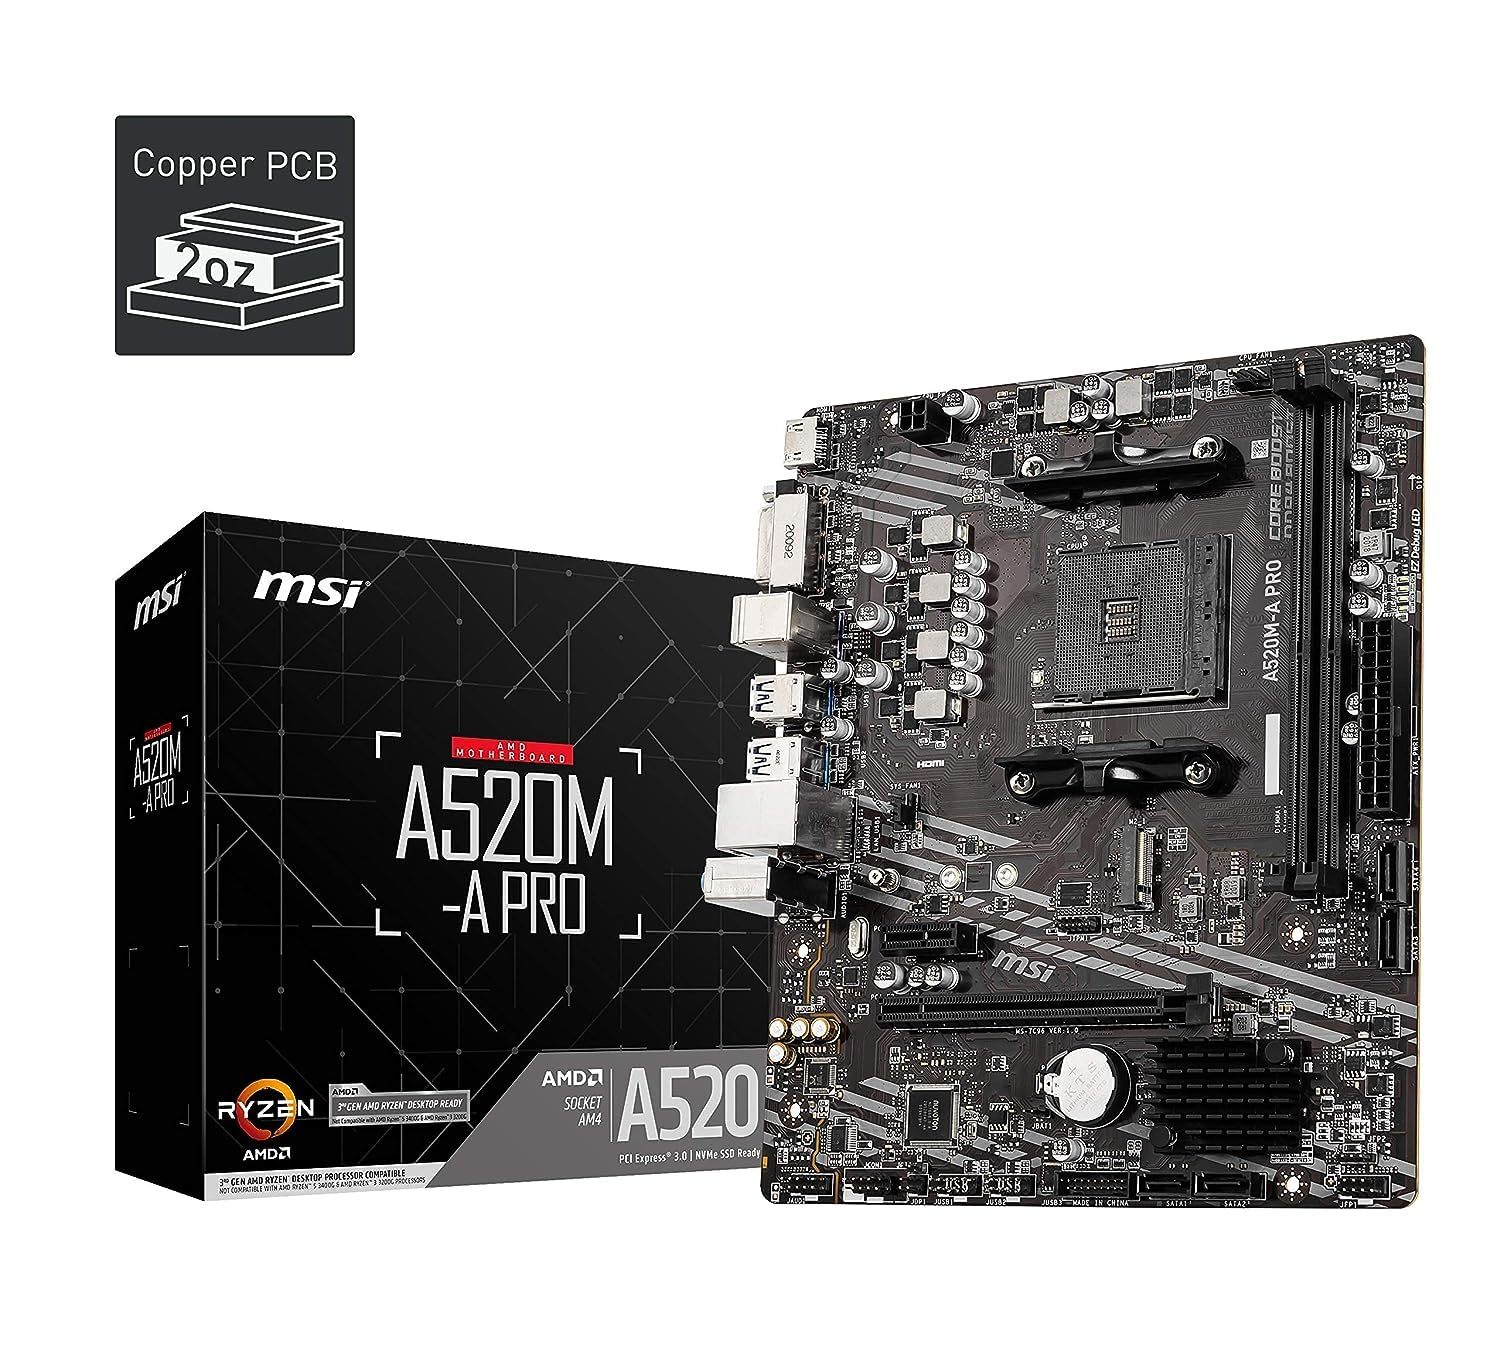 MSI A520M-A PRO Gaming Motherboard (AMD AM4, DDR4, PCIe 3.0, SATA 6Gb/s, M.2, US - $112.67